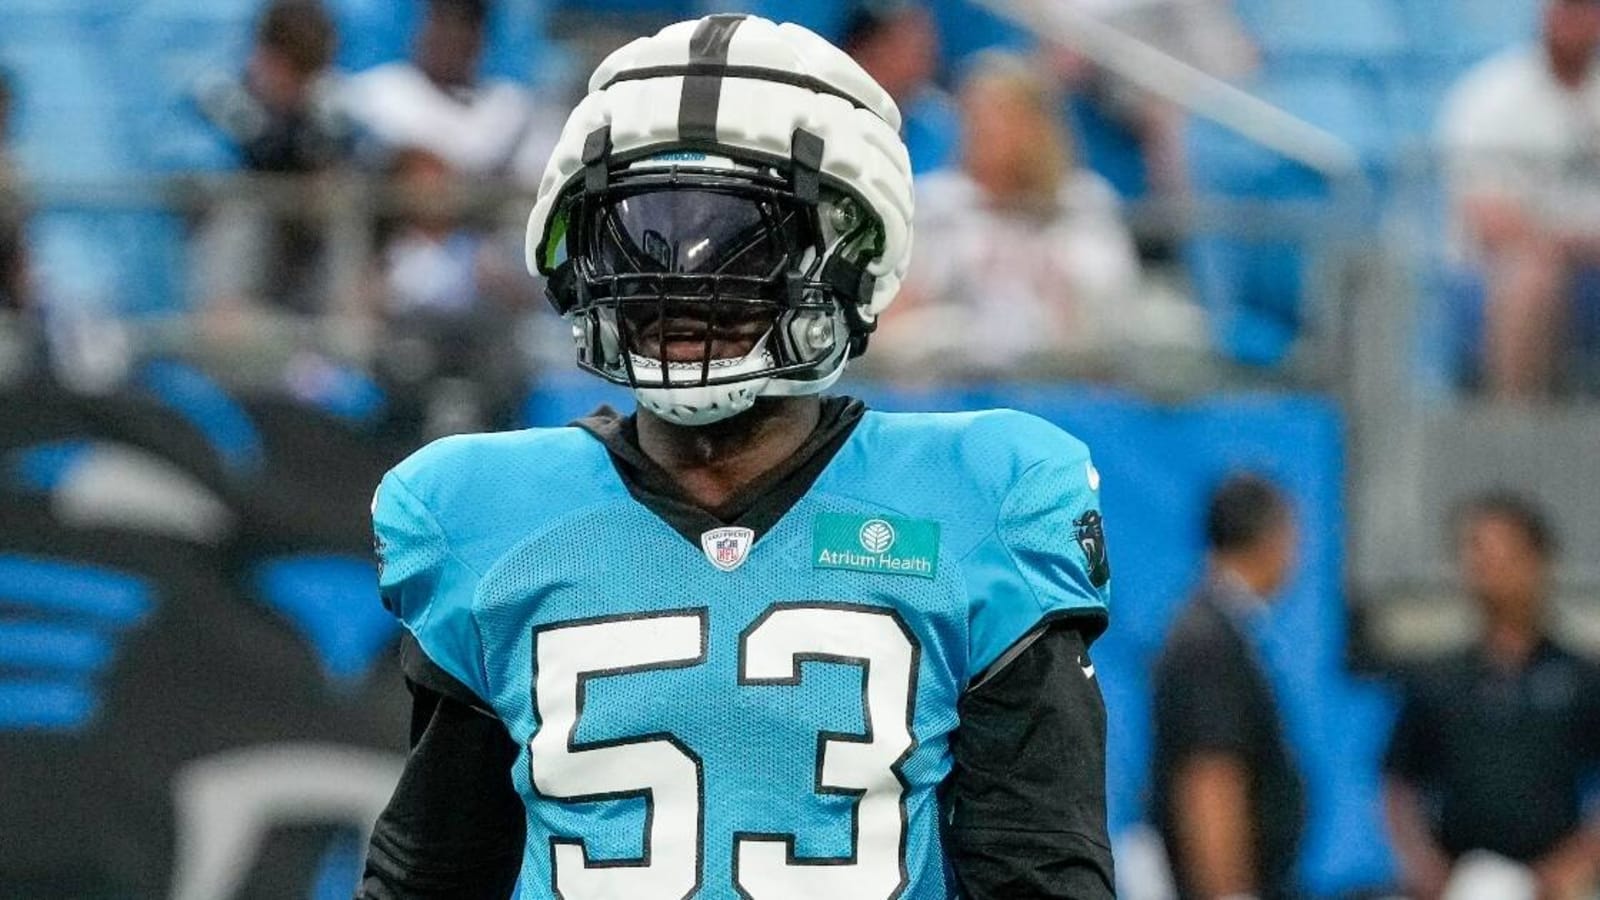 Panthers sign LB Deion Jones to active roster after Shaq Thompson injury